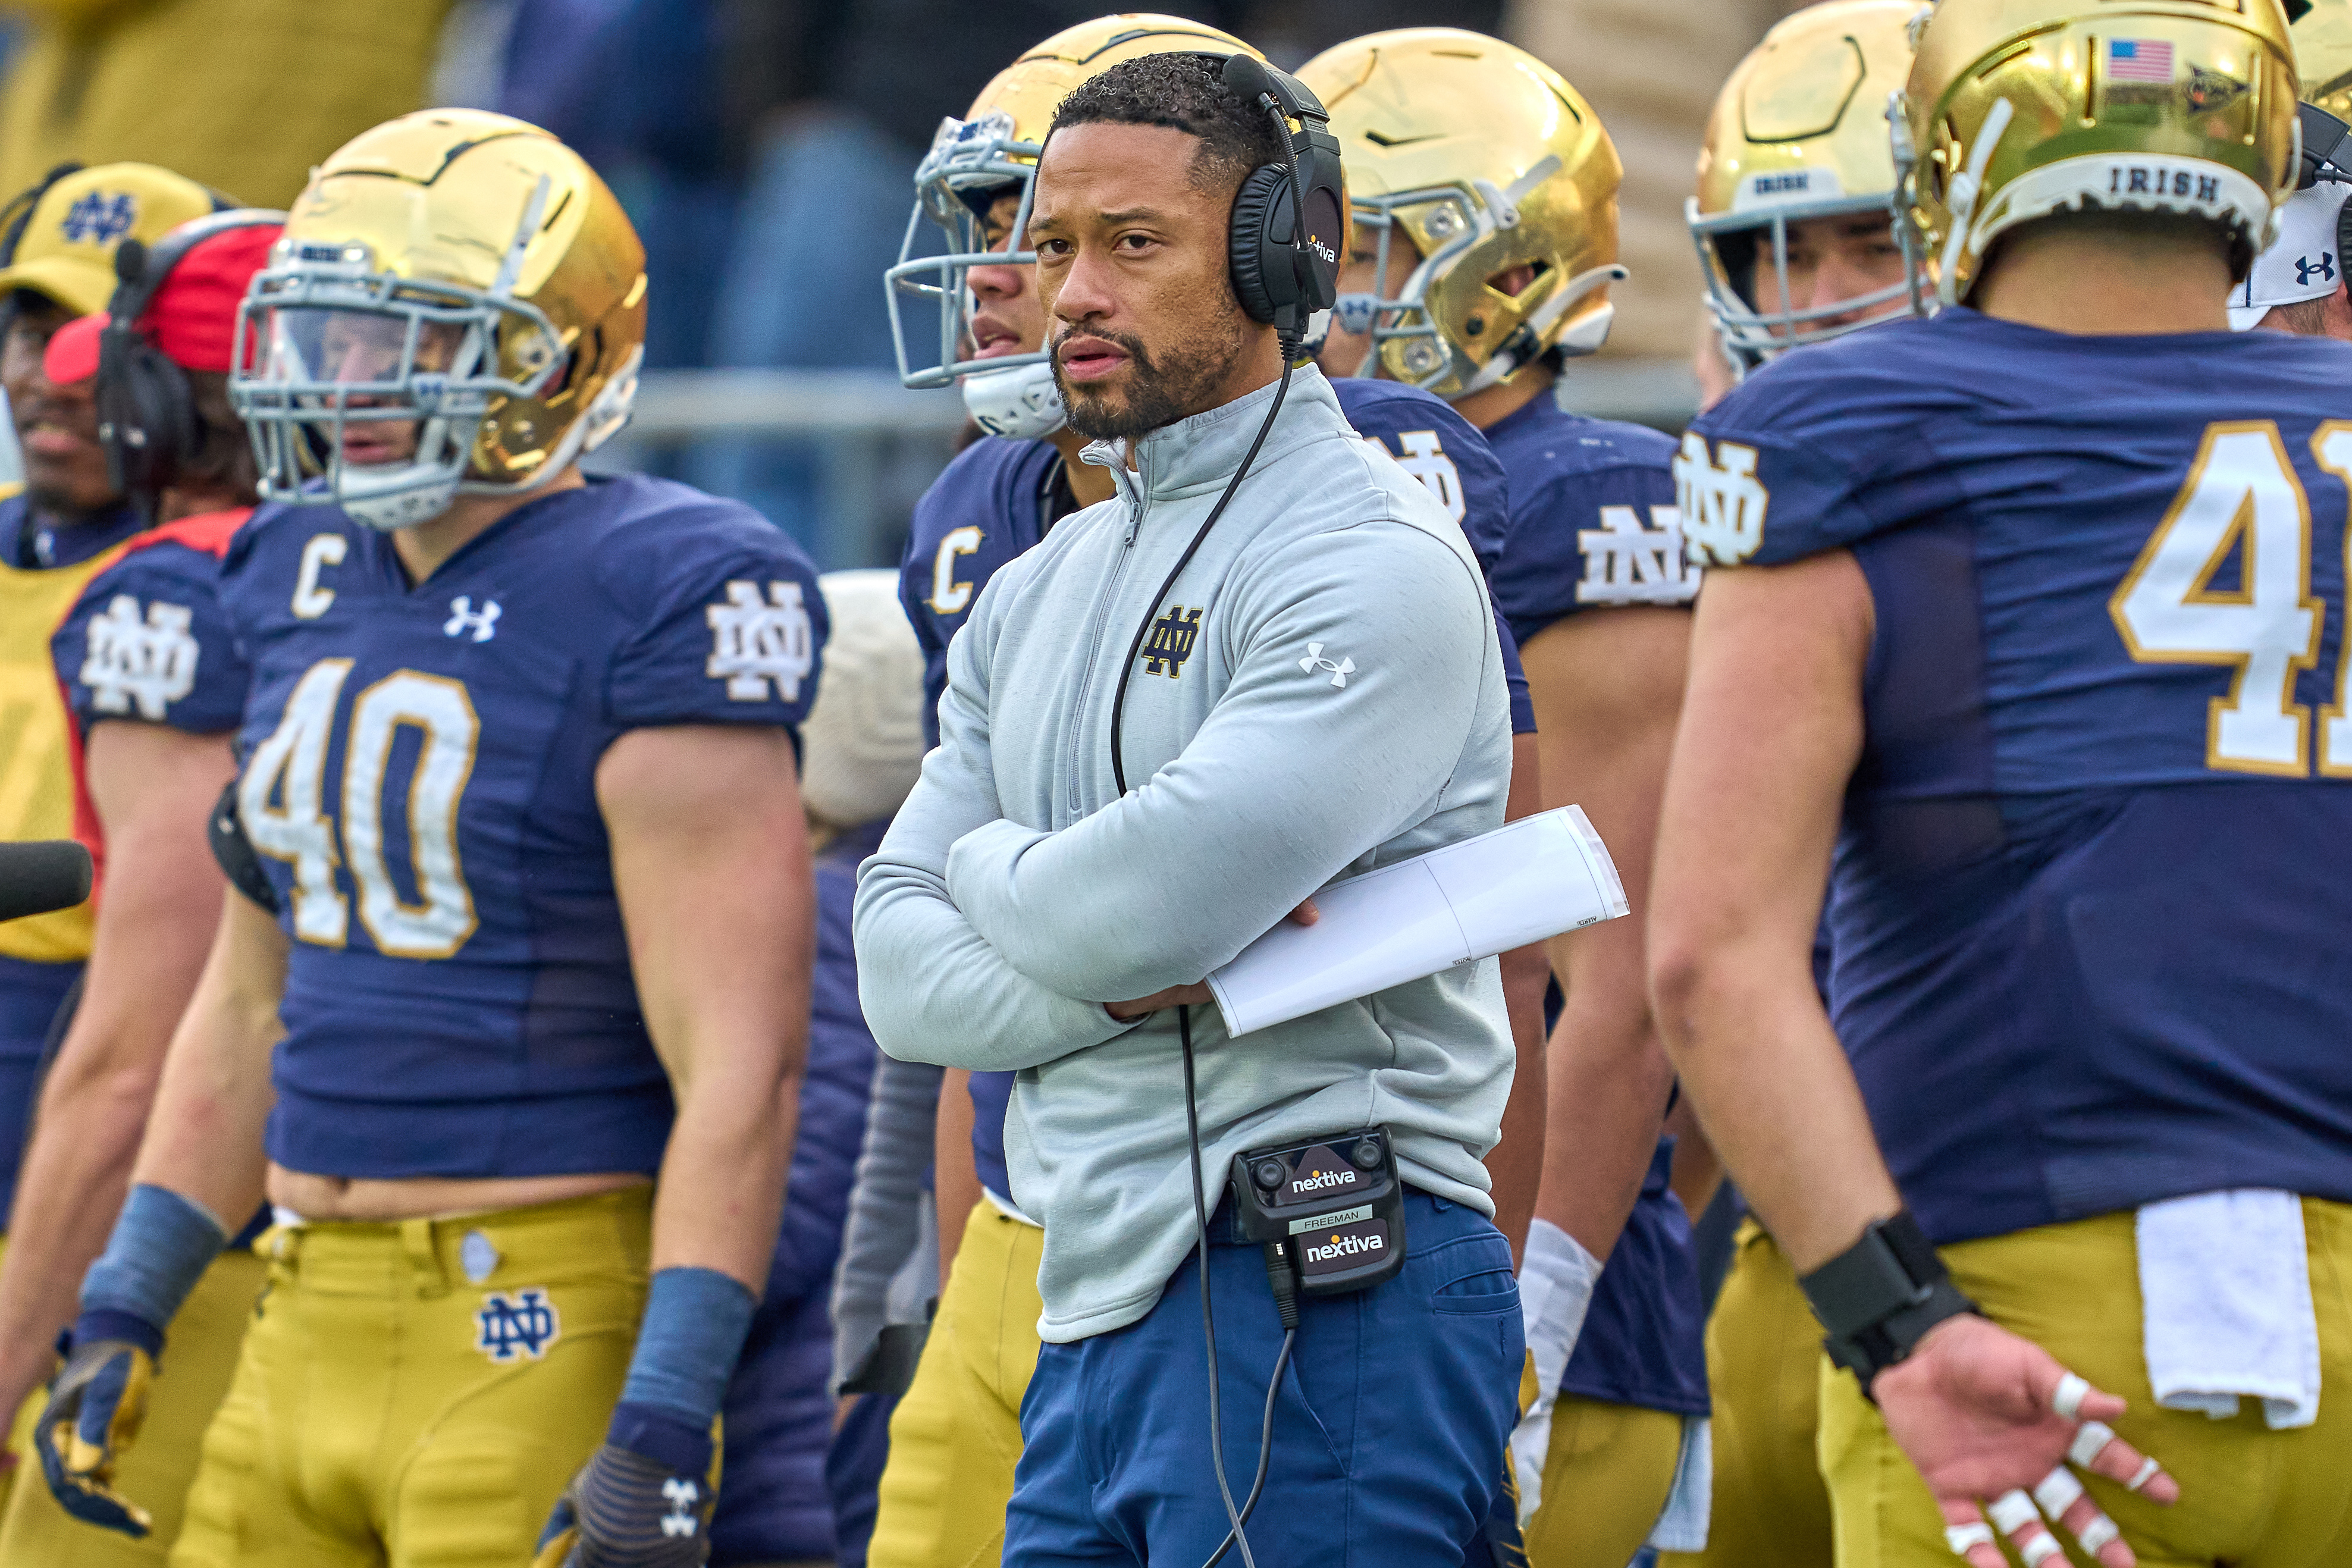 Report: Marcus Freeman Expected to Be Named Notre Dame HC After Brian Kelly Exit